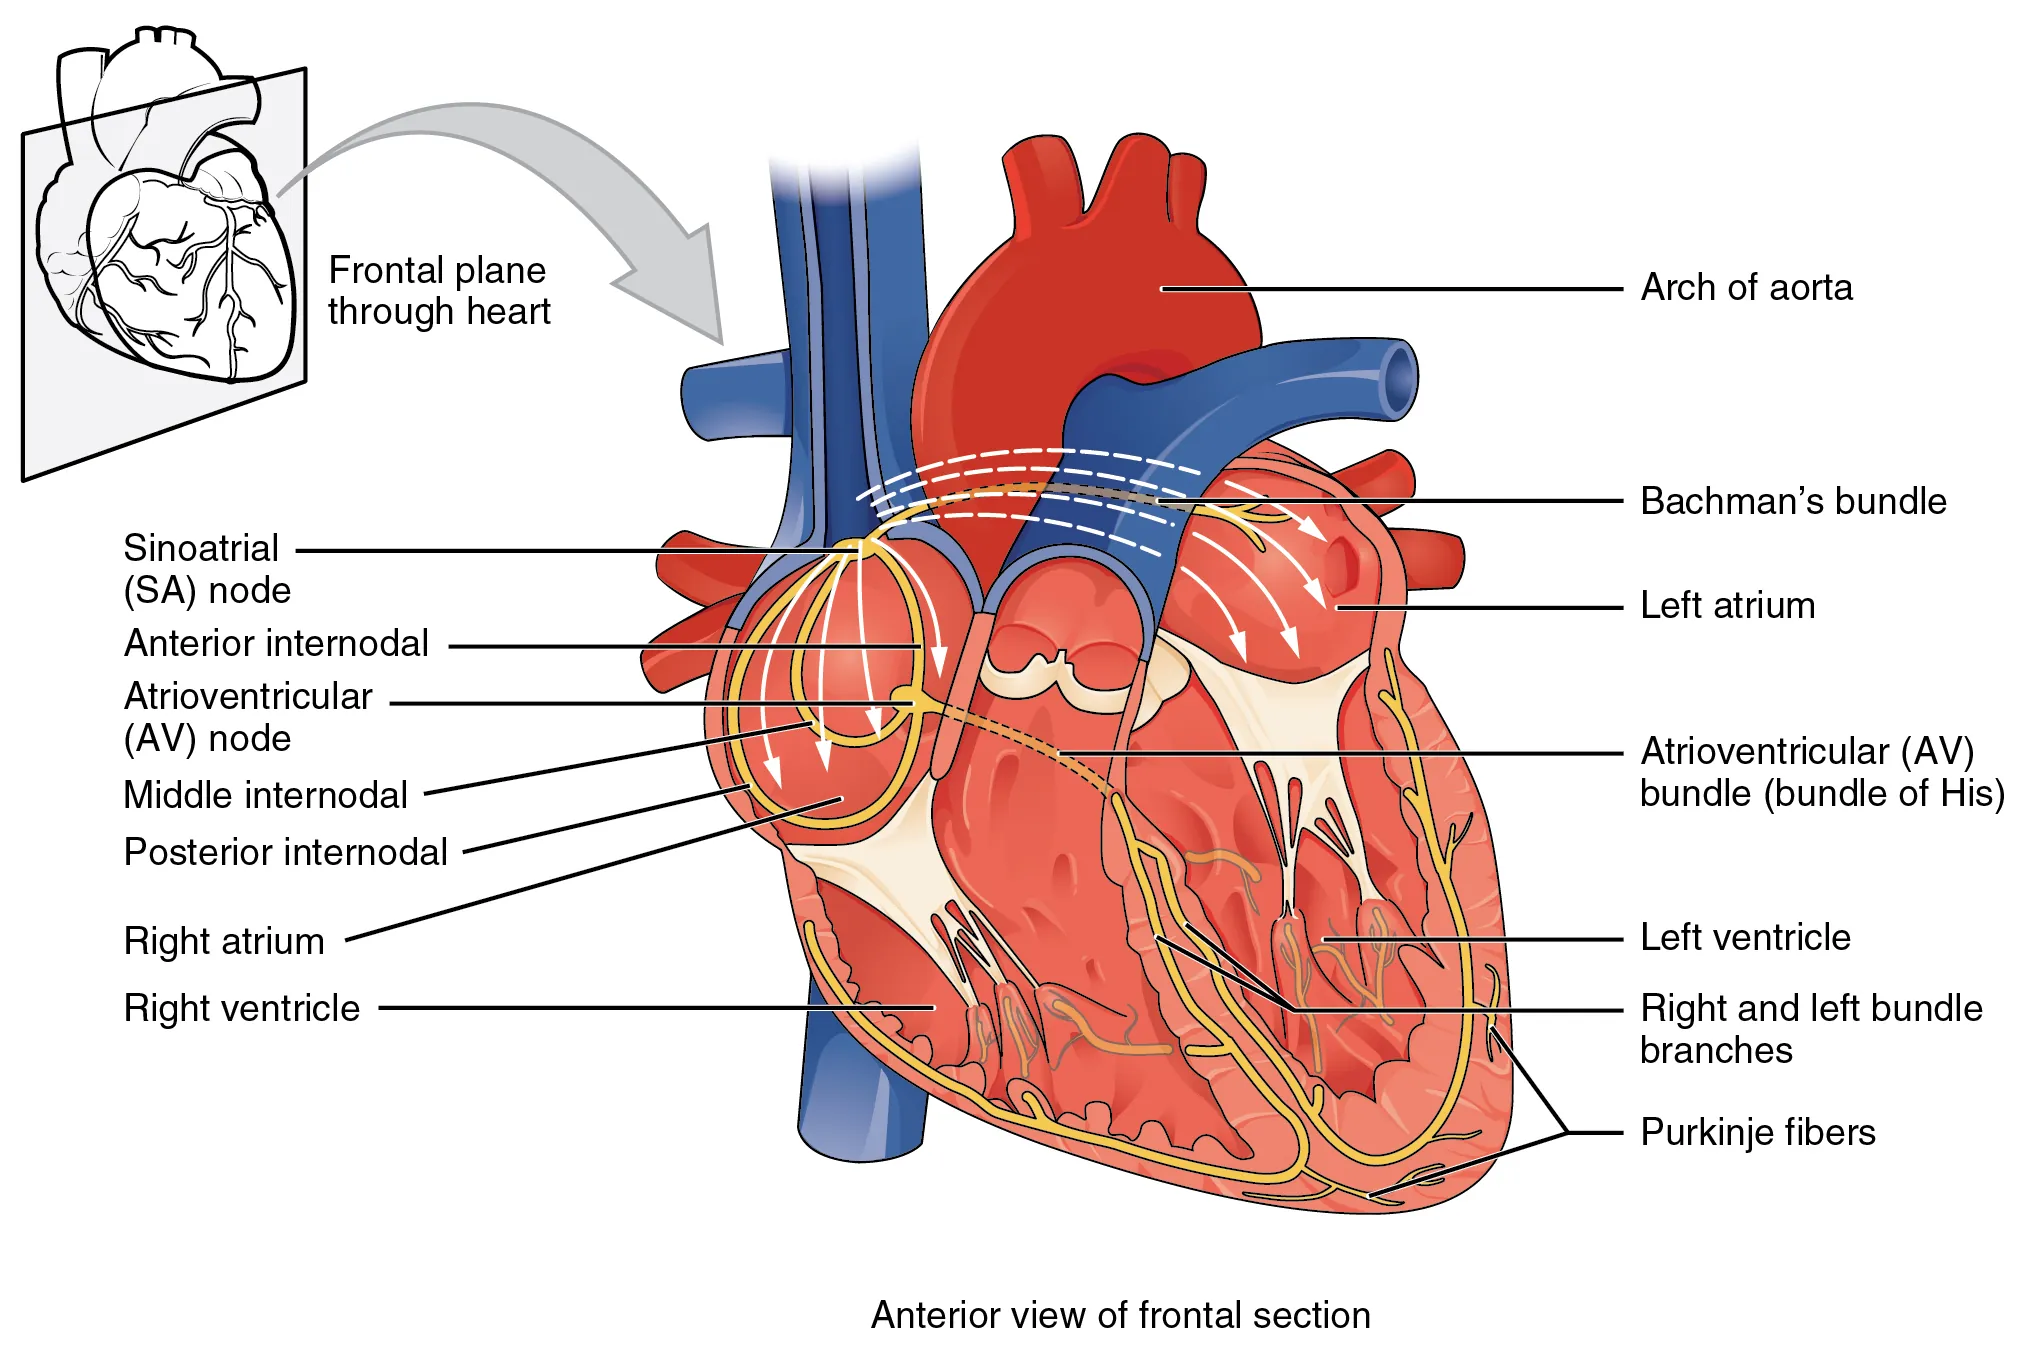 This image shows the anterior view of the frontal section of the heart with the major parts labeled.